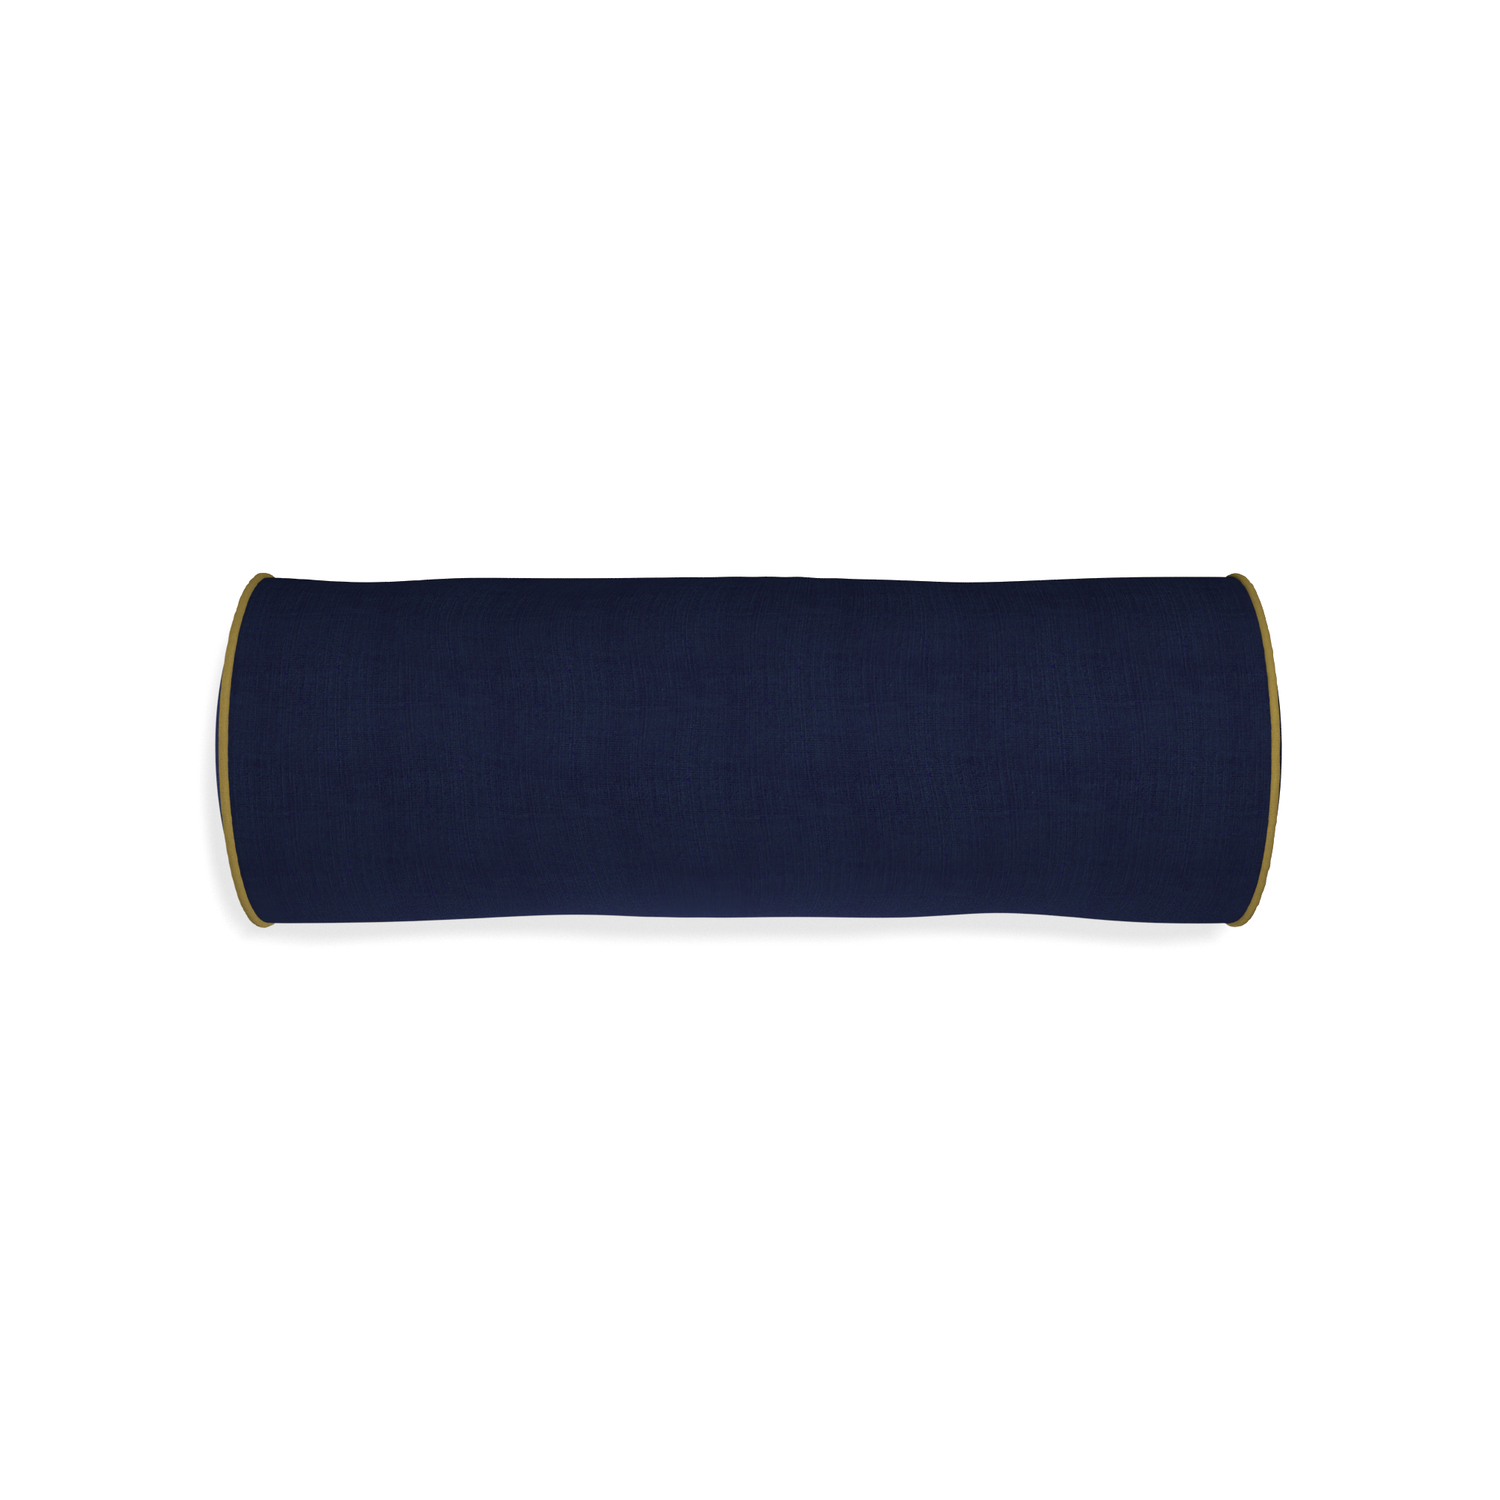 Bolster midnight custom navy bluepillow with c piping on white background